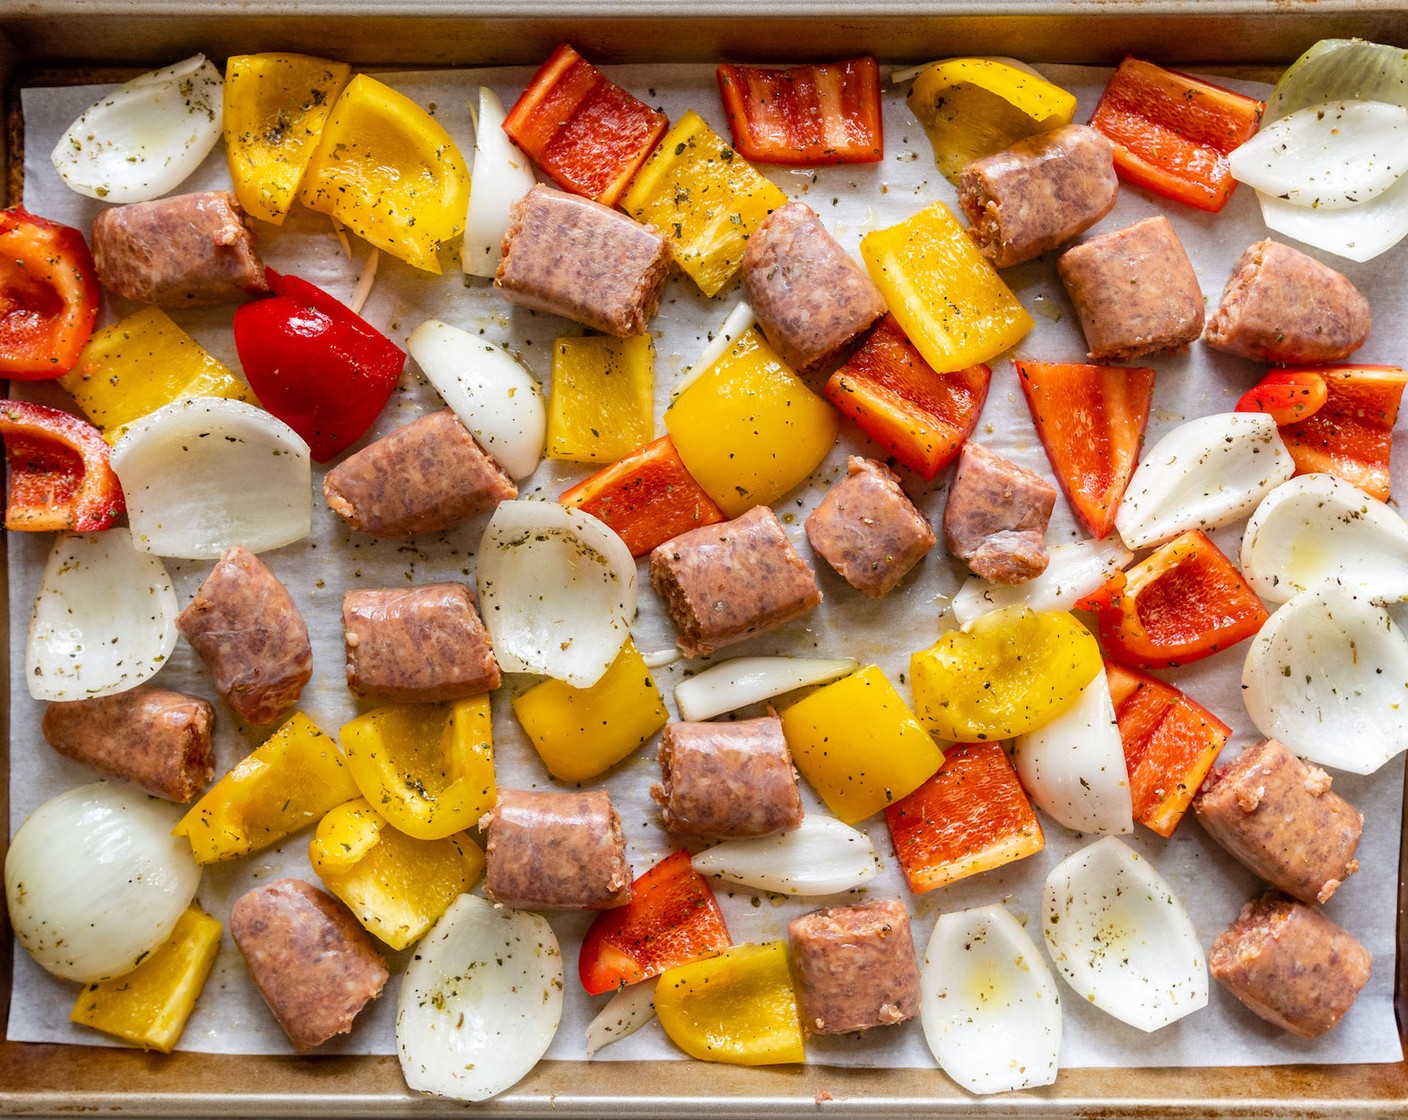 step 3 Spread out evenly on the sheet pan. Nestle the Italian Sausage Link (1 pckg) in between the veggies. Bake in the oven for 15 minutes.